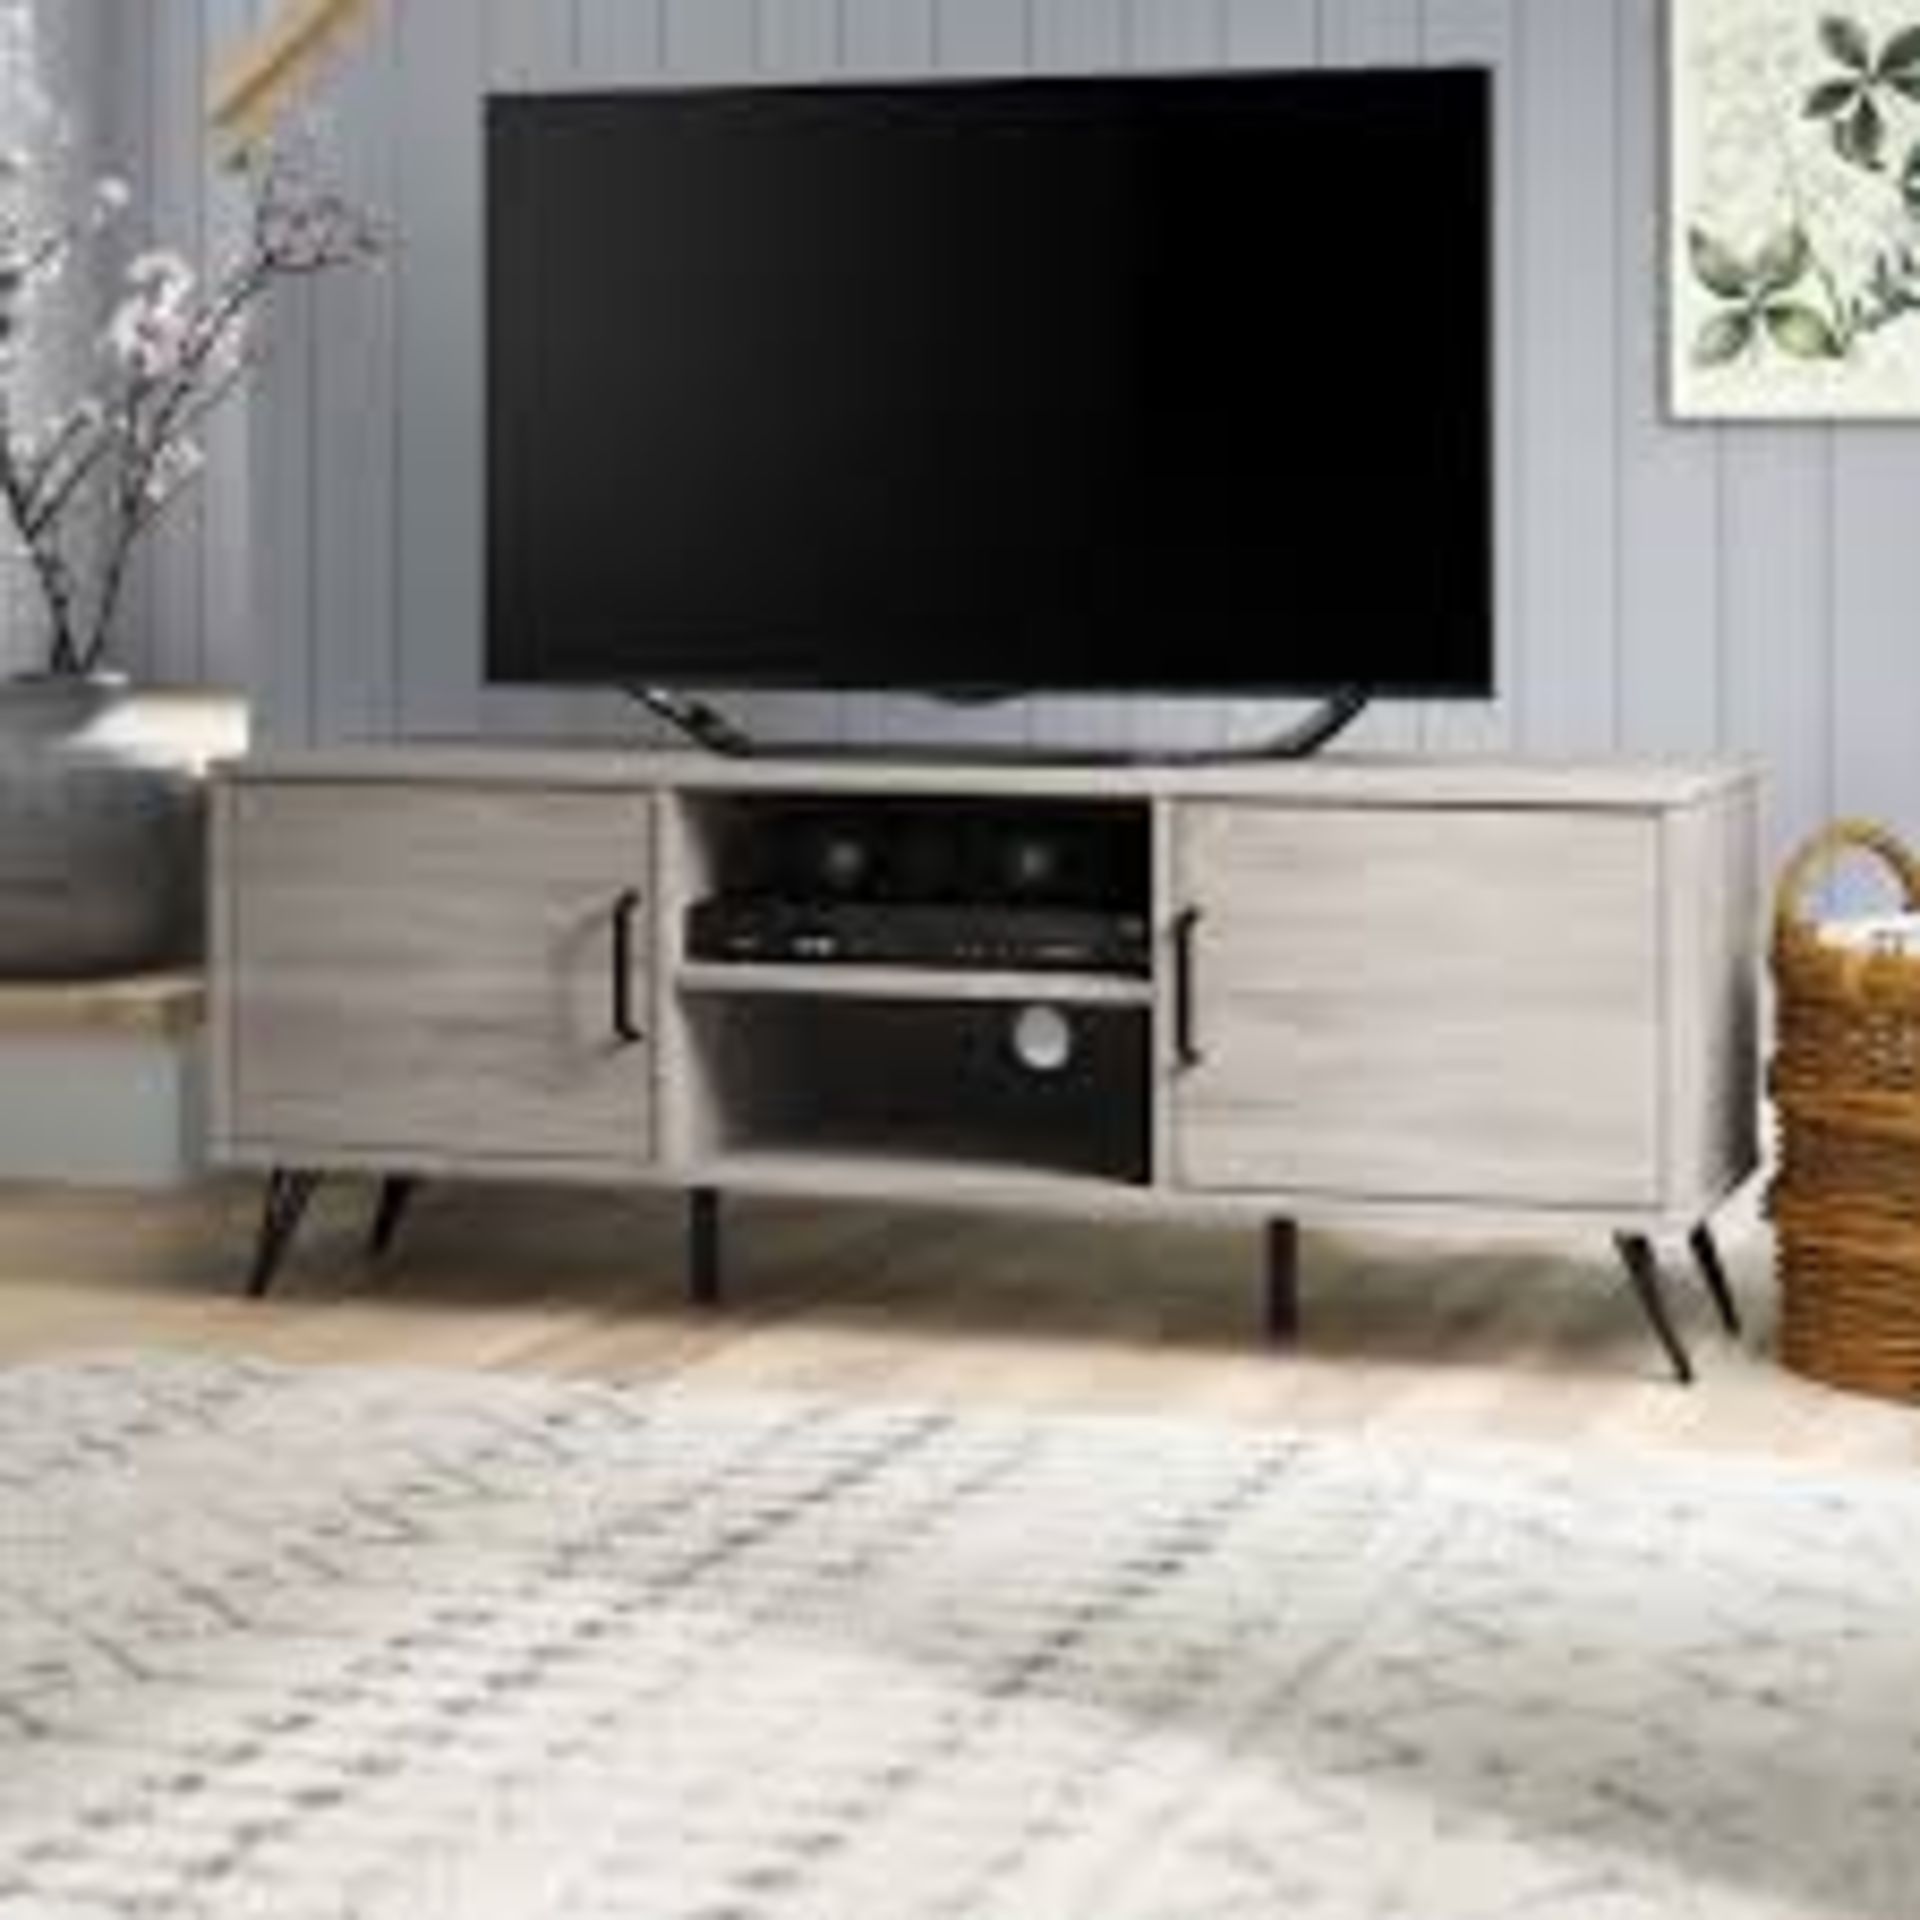 Boxed Chippewa TV Stand RRP £90 (17903) (Appraisals Available Upon Request)(Pictures Are For